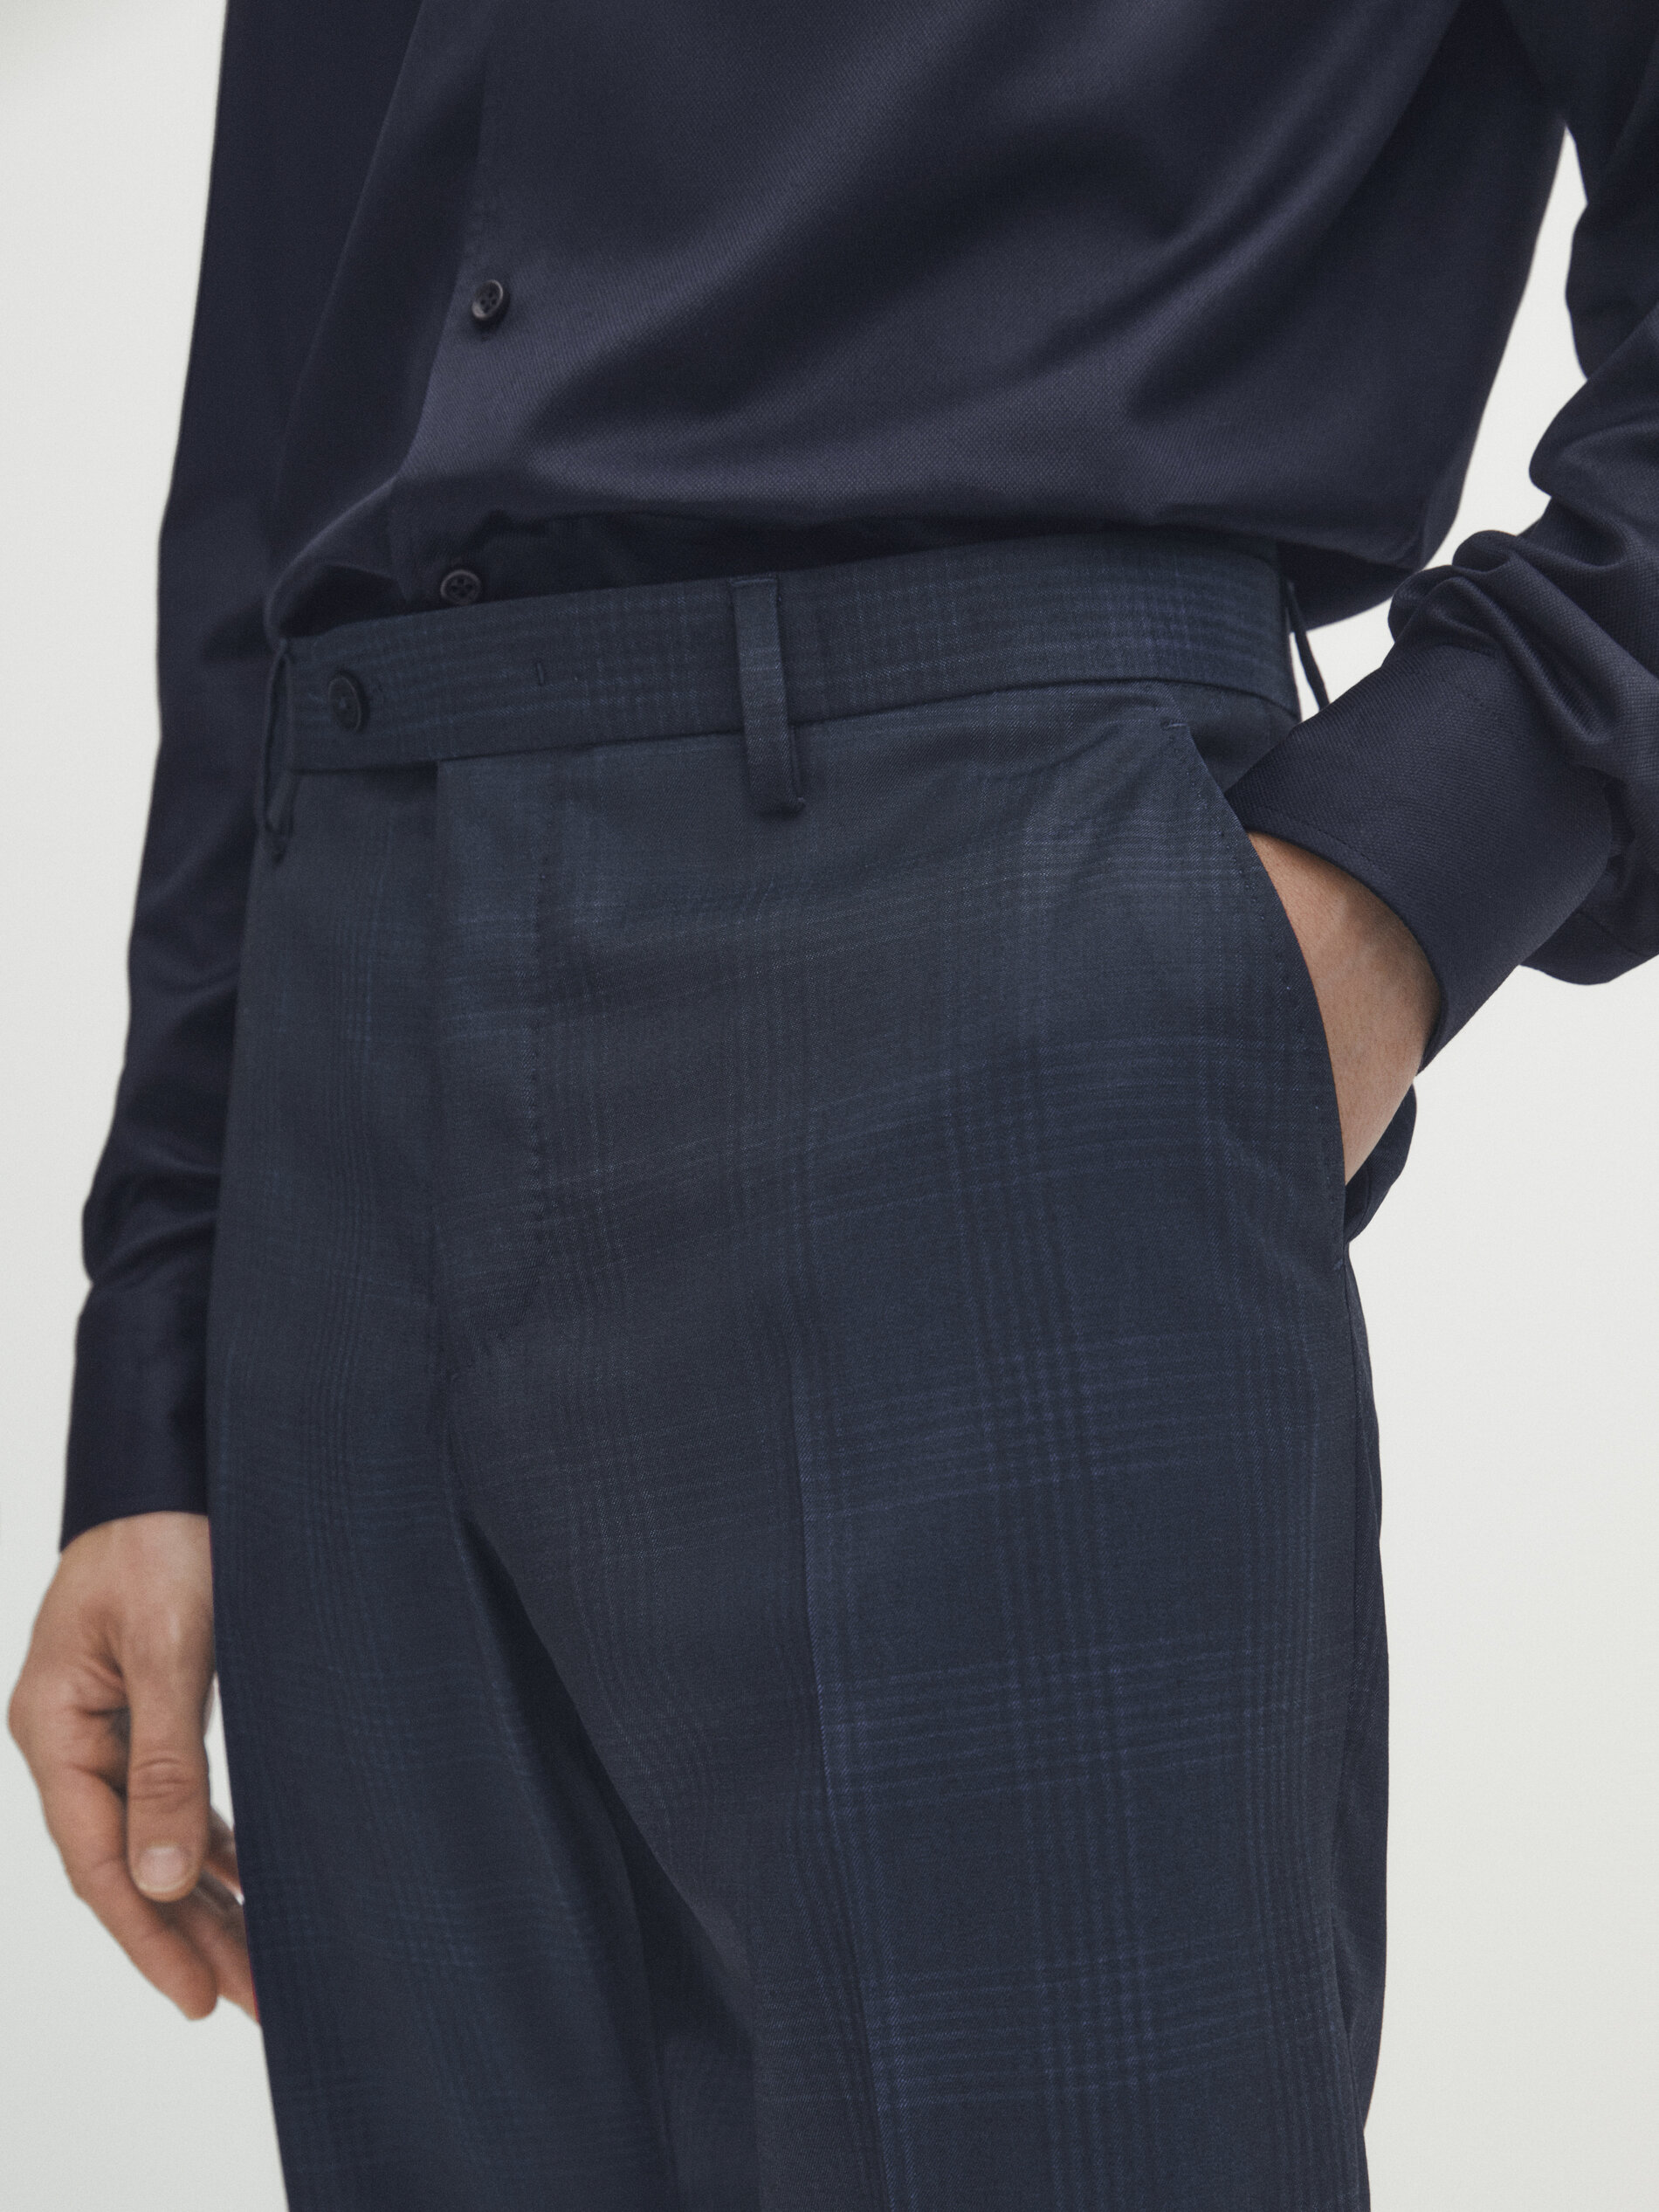 Gianni Feraud slim fit navy check suit trousers  ASOS